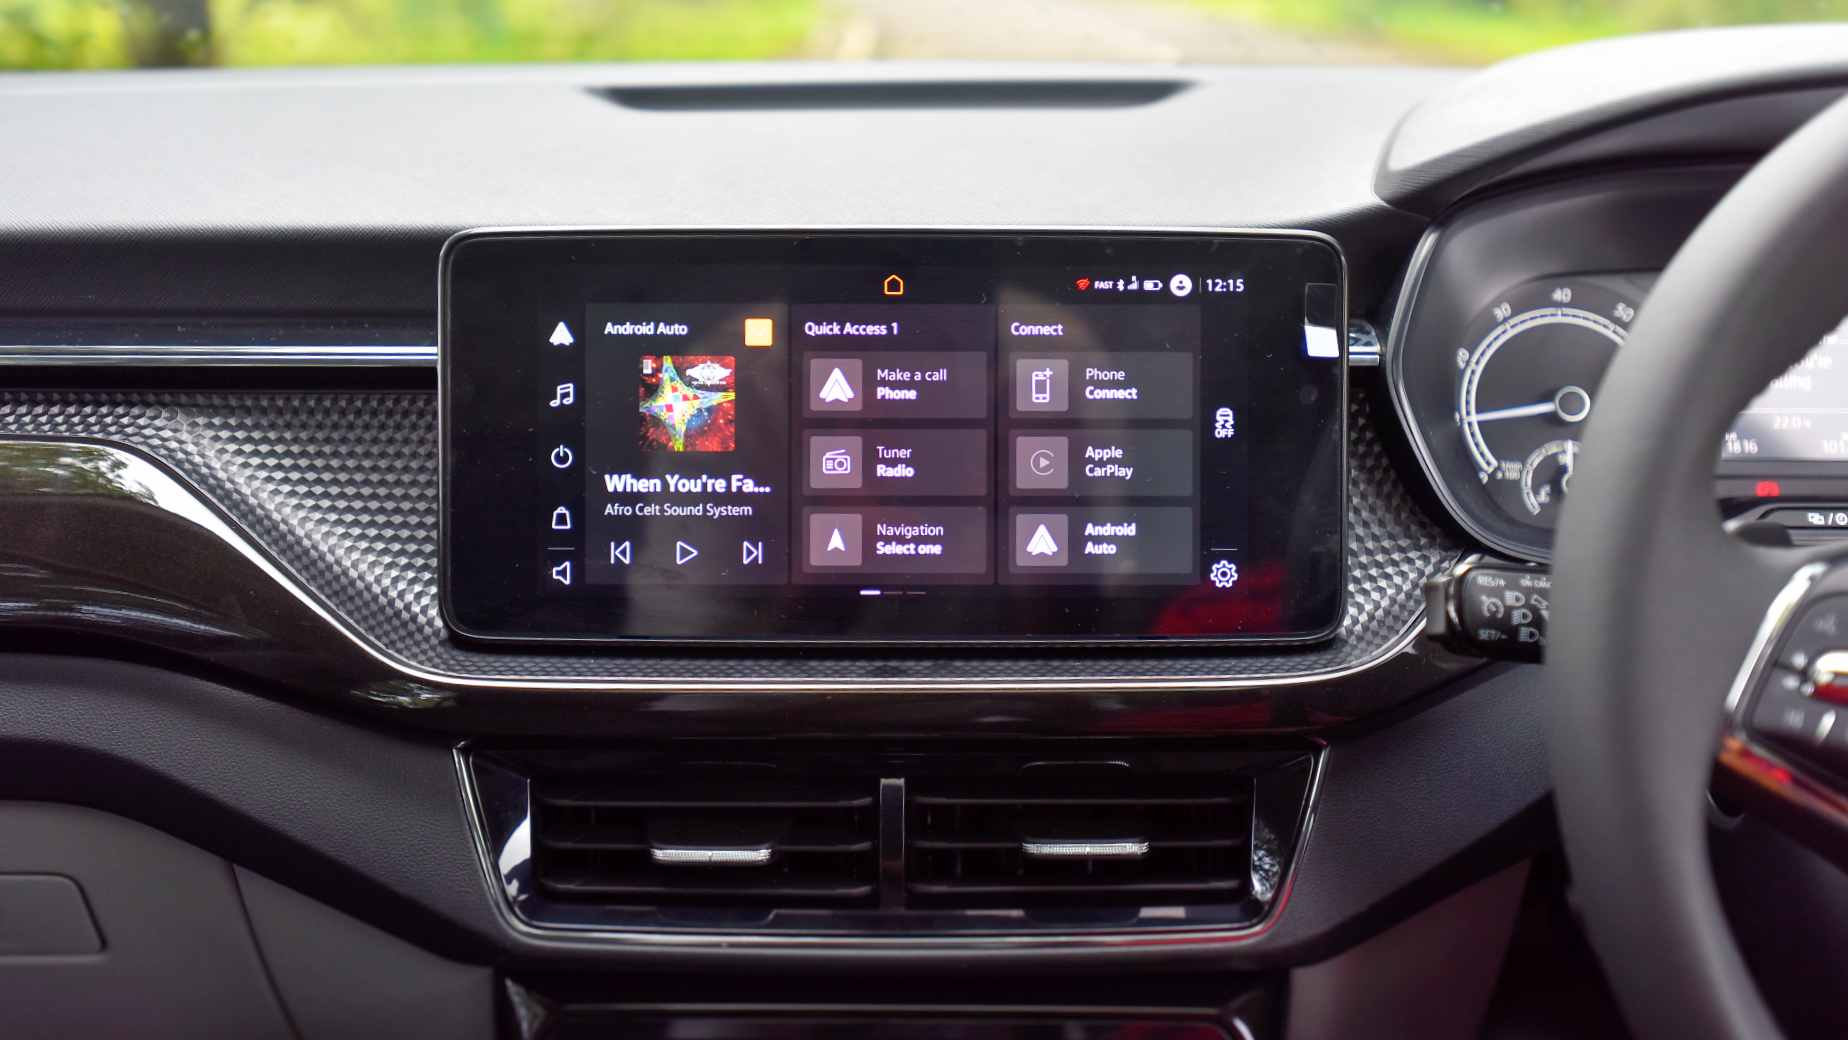 Items on the 10-inch touchscreen remain perfectly legible even in daylight glare, and the system is slick overall. Image: Overdrive/Anis Shaikh